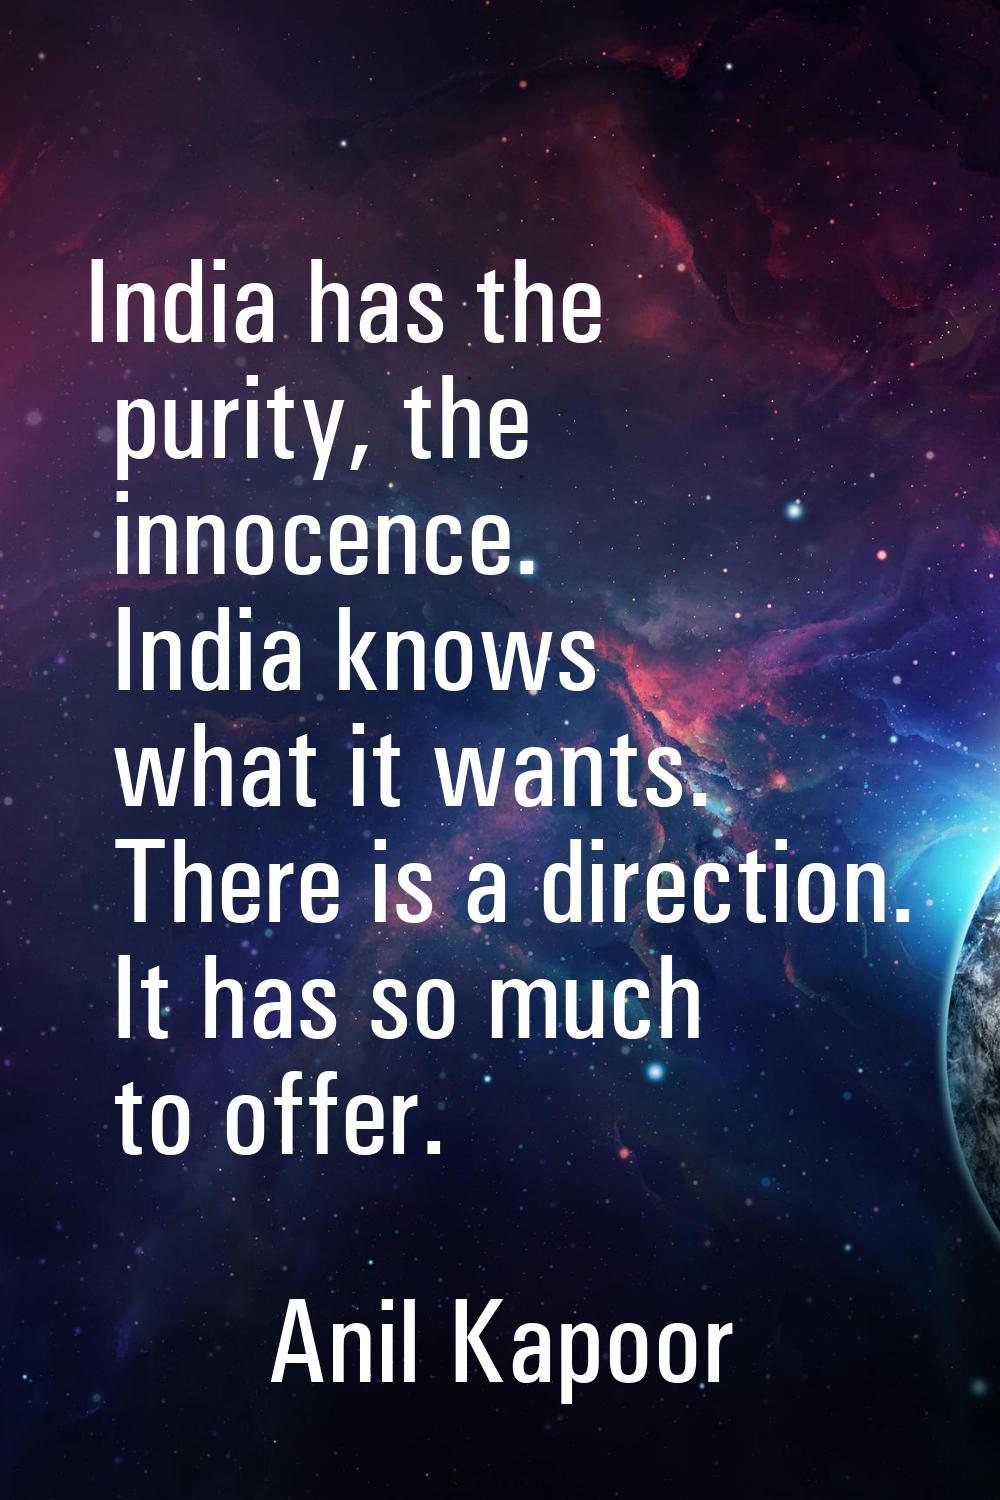 India has the purity, the innocence. India knows what it wants. There is a direction. It has so muc